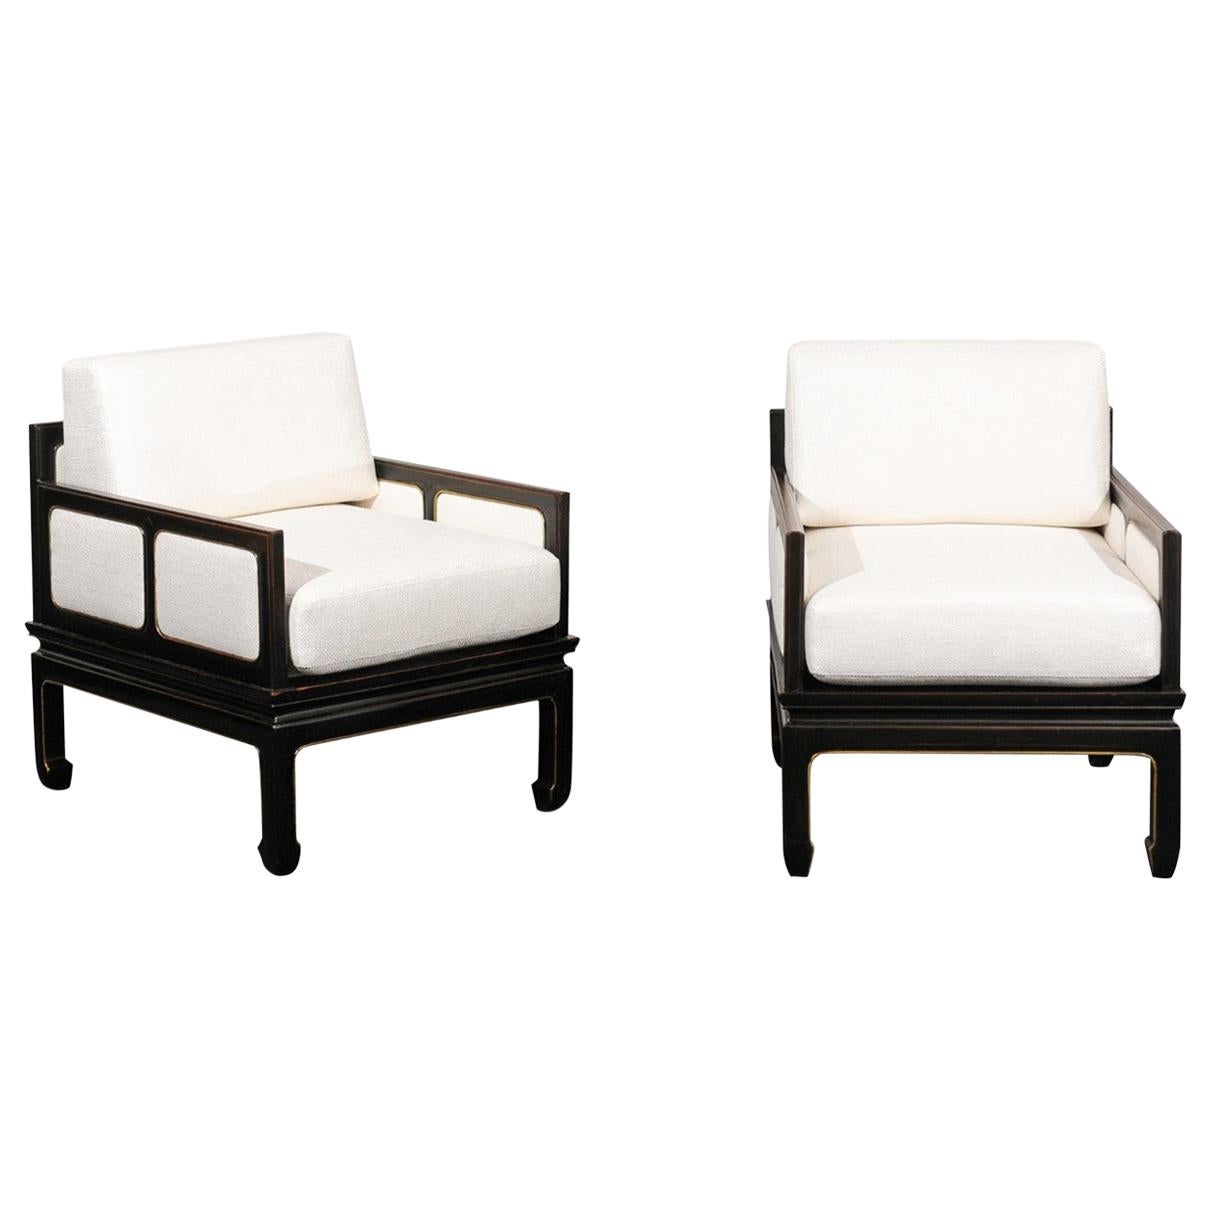 Sophisticated Restored Pair of Lounge Chairs by Baker Furniture, circa 1960 For Sale